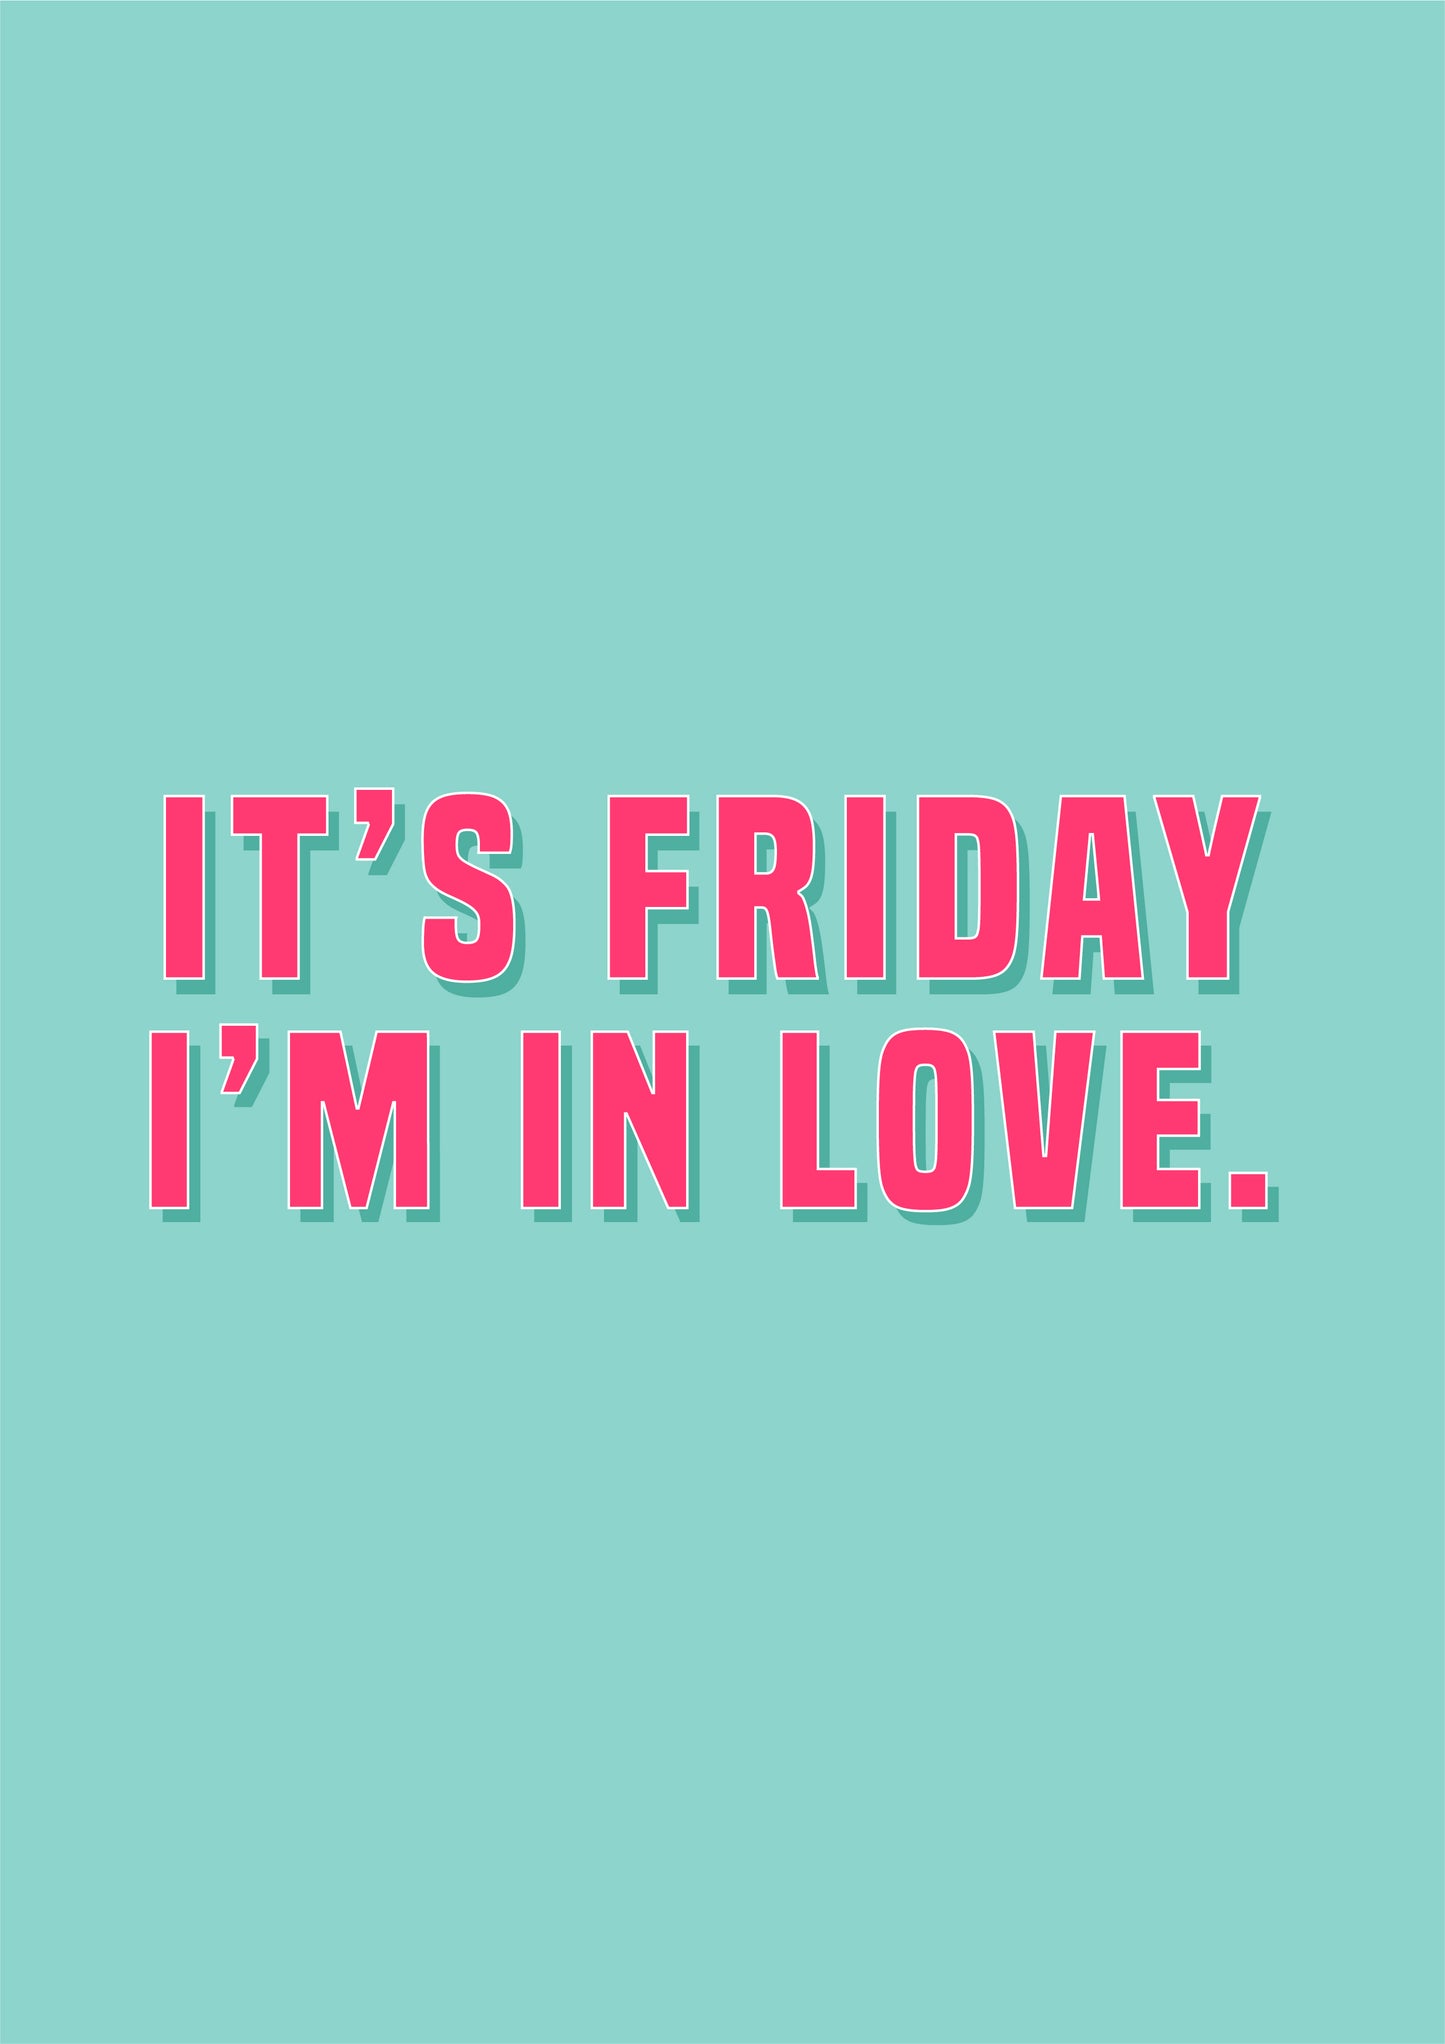 It's Friday Im In Love Song Lyrics Colourful Print